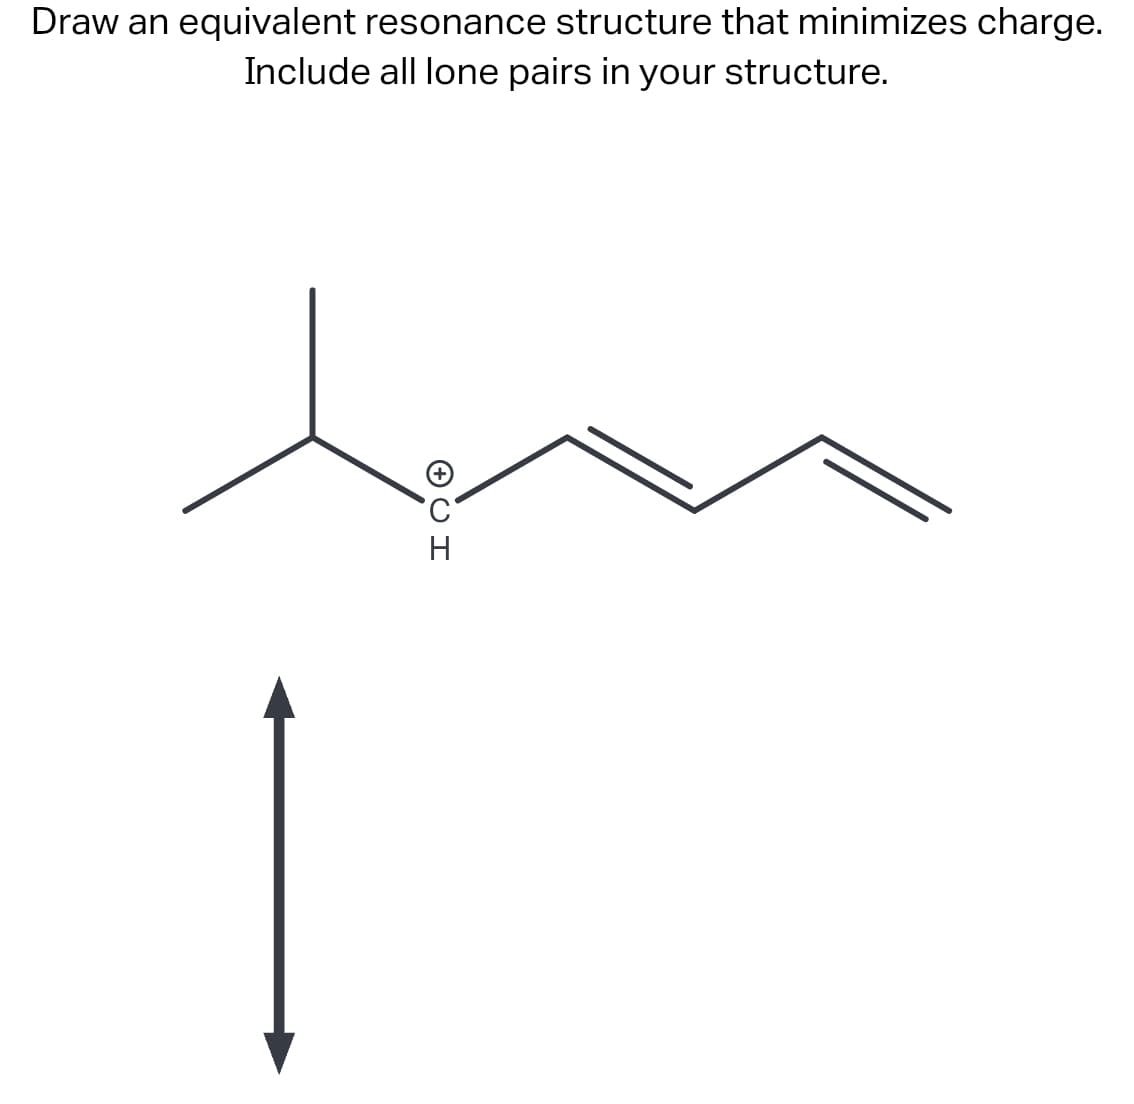 Draw an equivalent resonance structure that minimizes charge.
Include all lone pairs in your structure.
CH